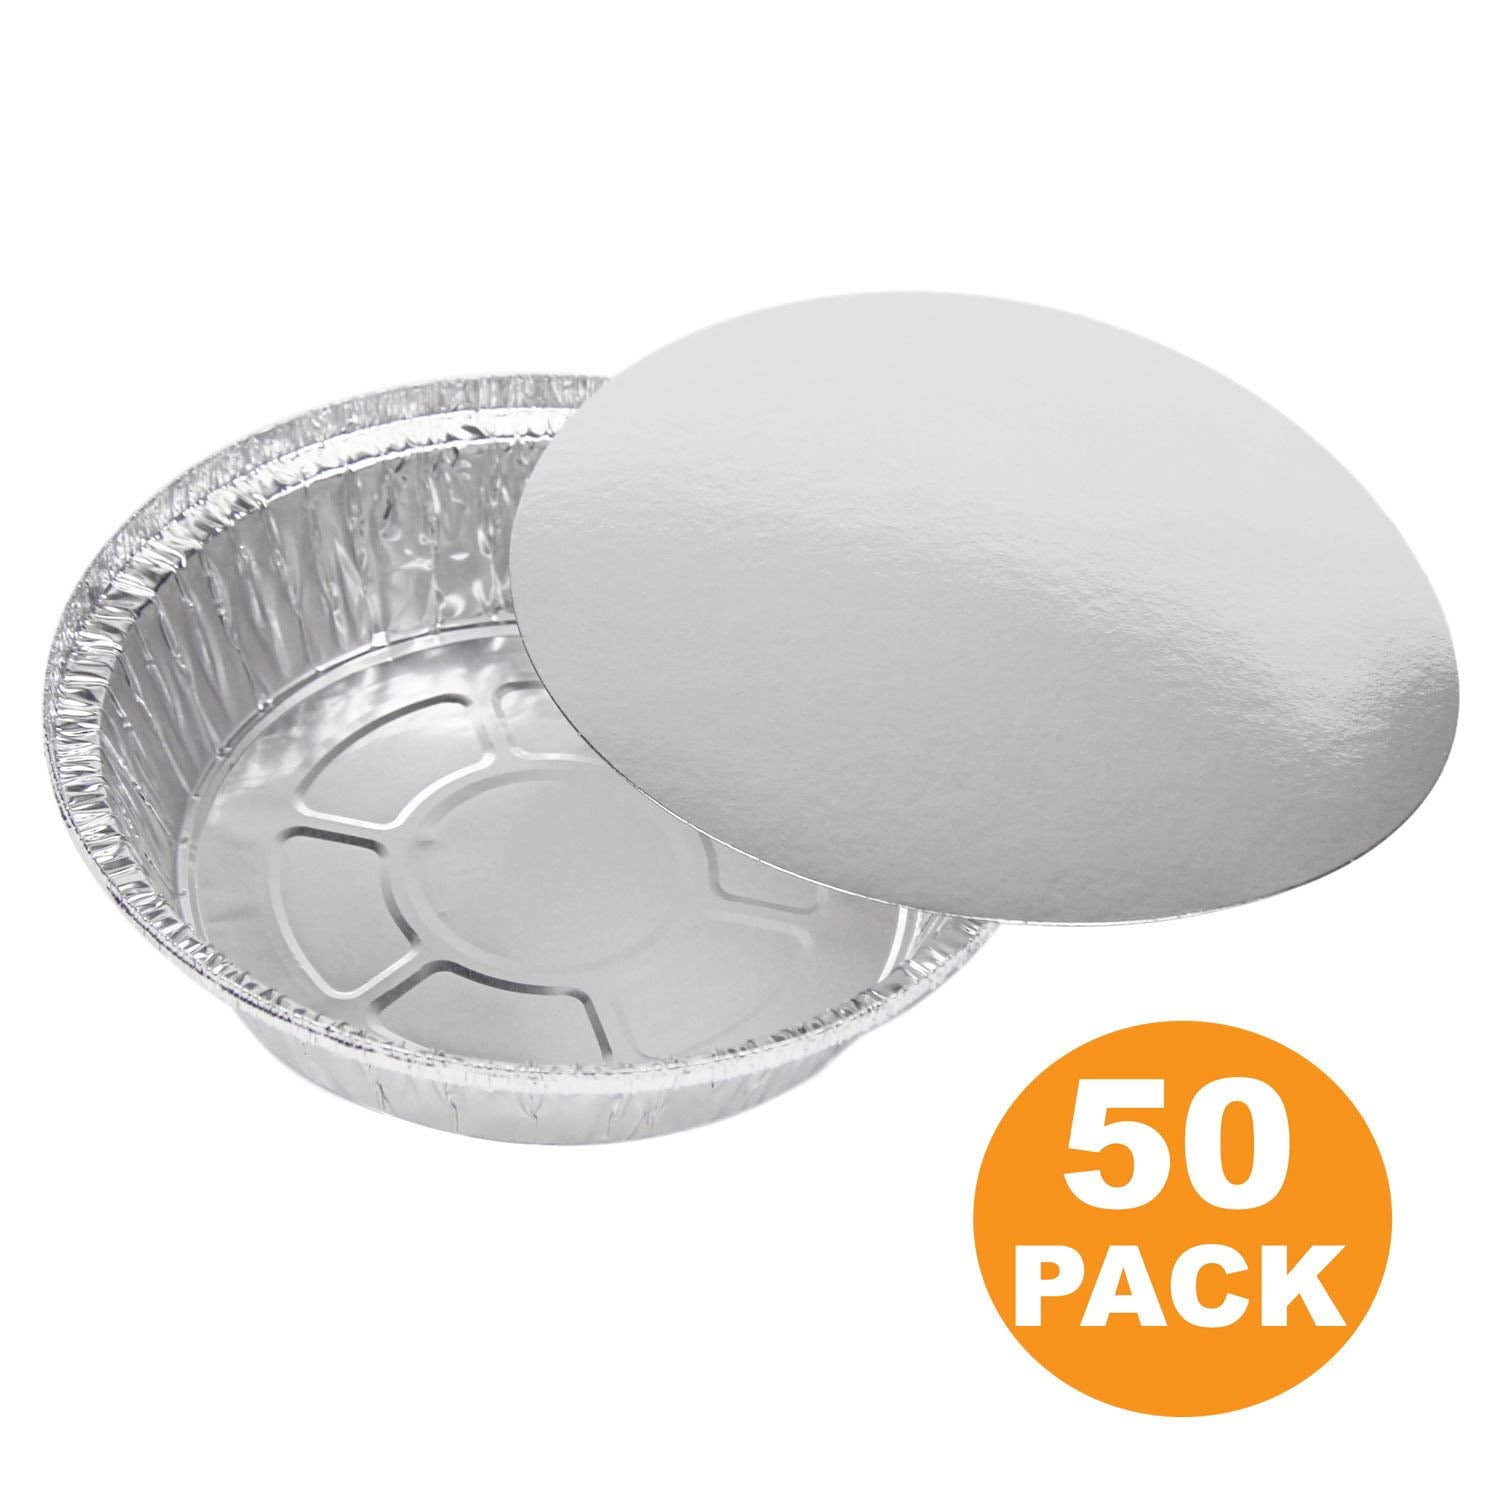 NEW PACK OF 18 ROUND ALUMINIUM FOIL CONTAINERS 9" HOT FOOD TAKEAWAY WITH LID BOX